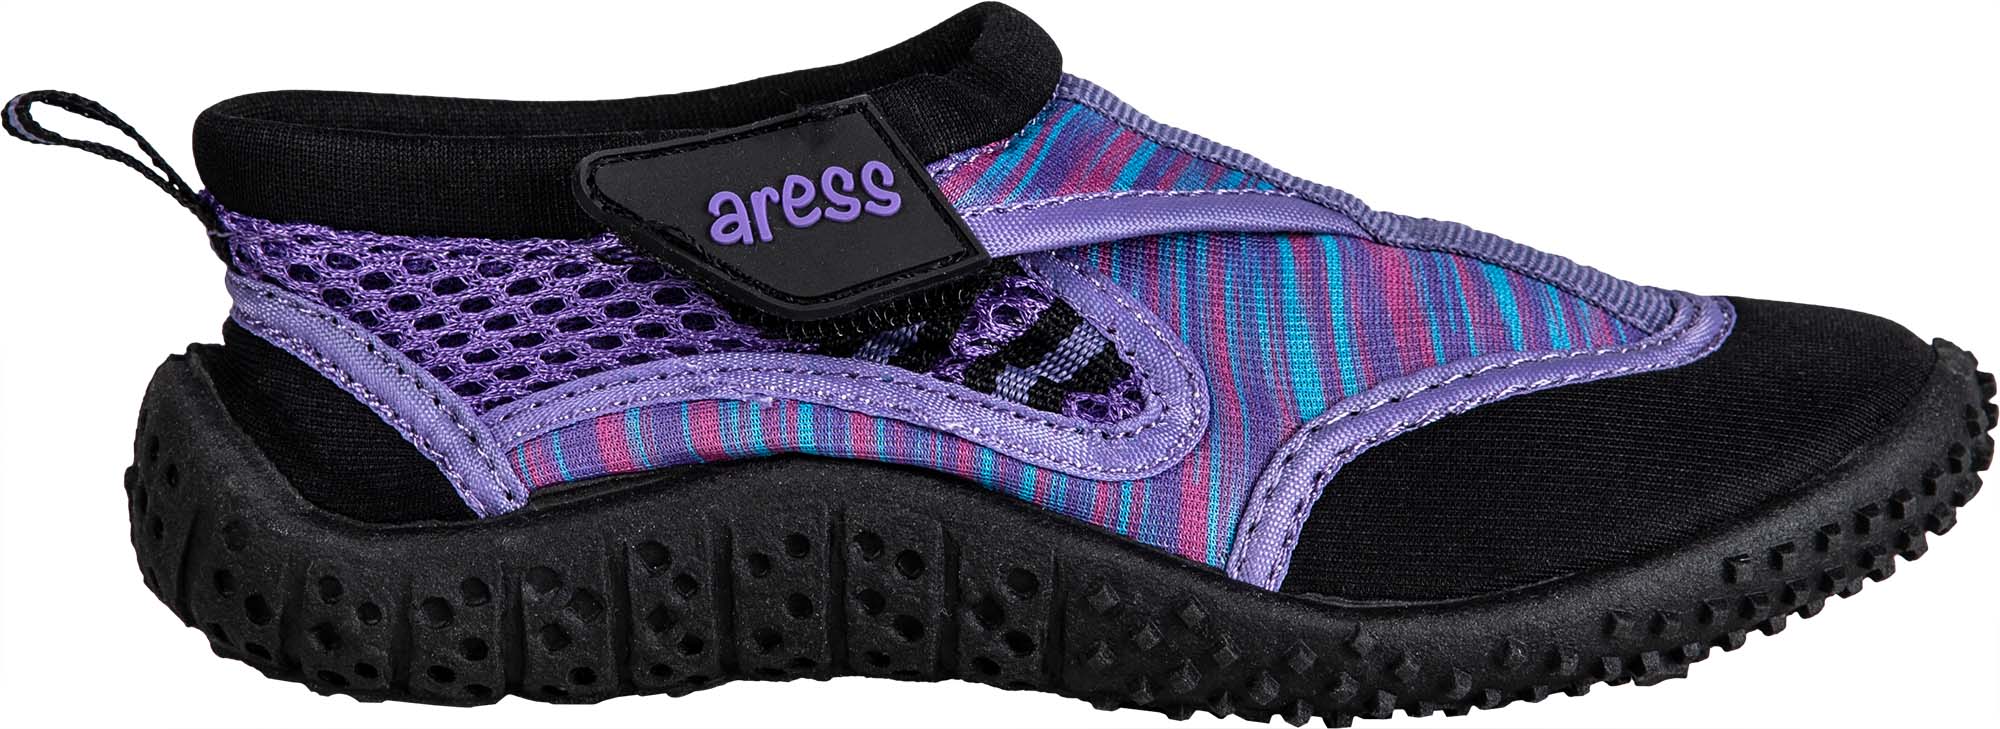 Kids' water shoes